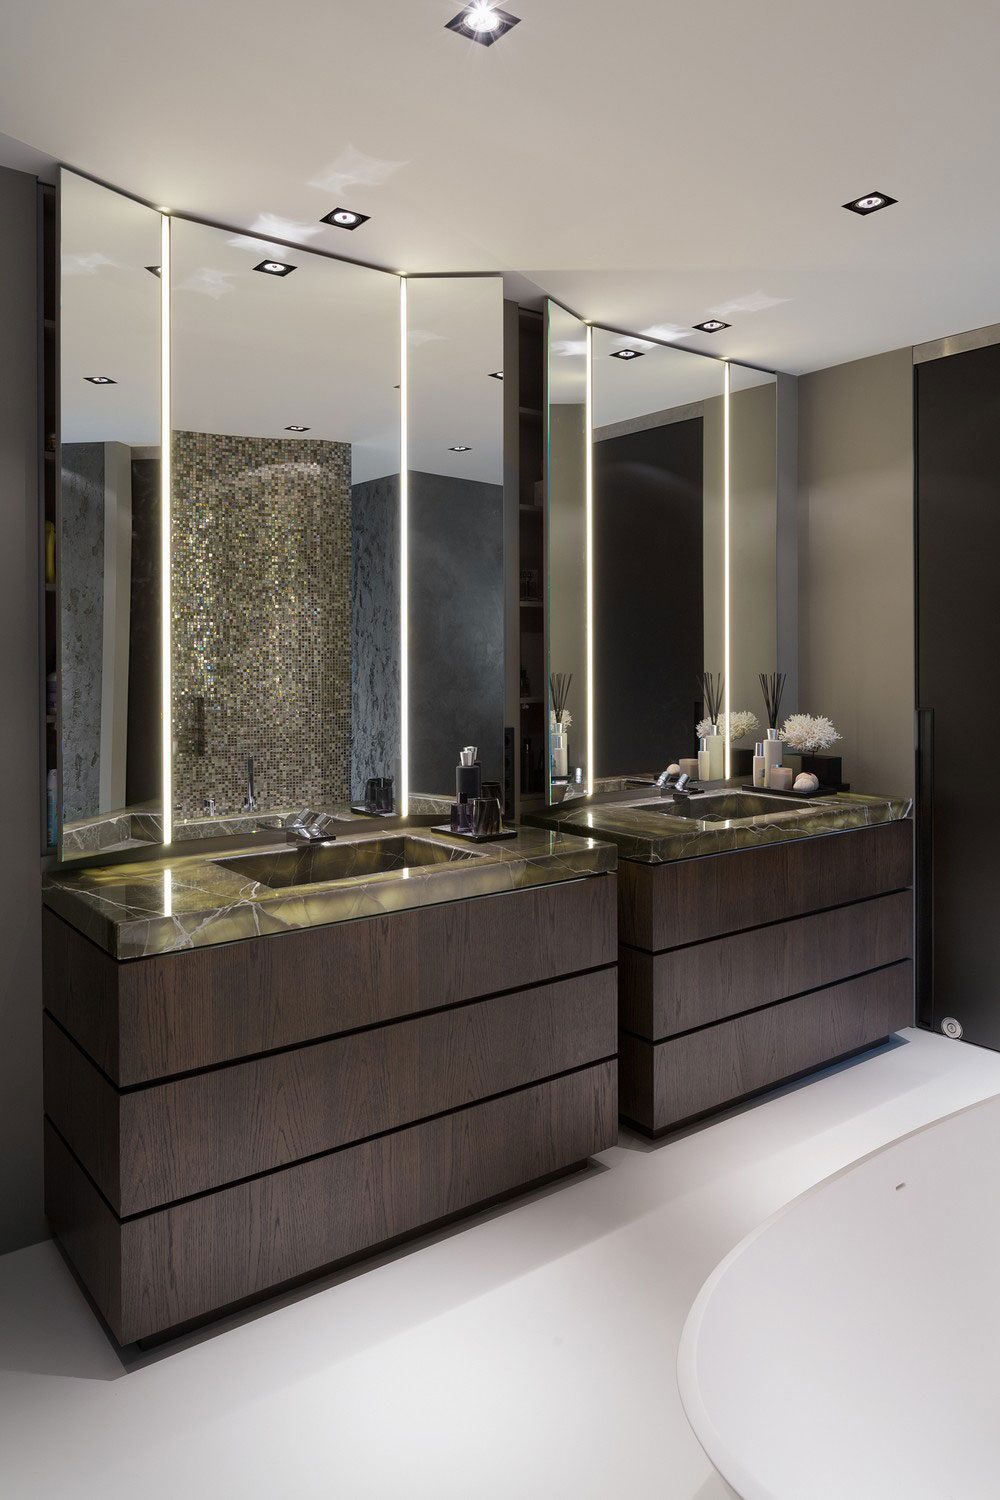 Double Vanity Sinks Luxurious Double Vanity With Double Sinks And Bay Style Folding Mirrors As Another Main Feature Of Rotterdam Residence Bathroom House Designs  Contemporary Villa Interior With Sophisticated Chic Design 